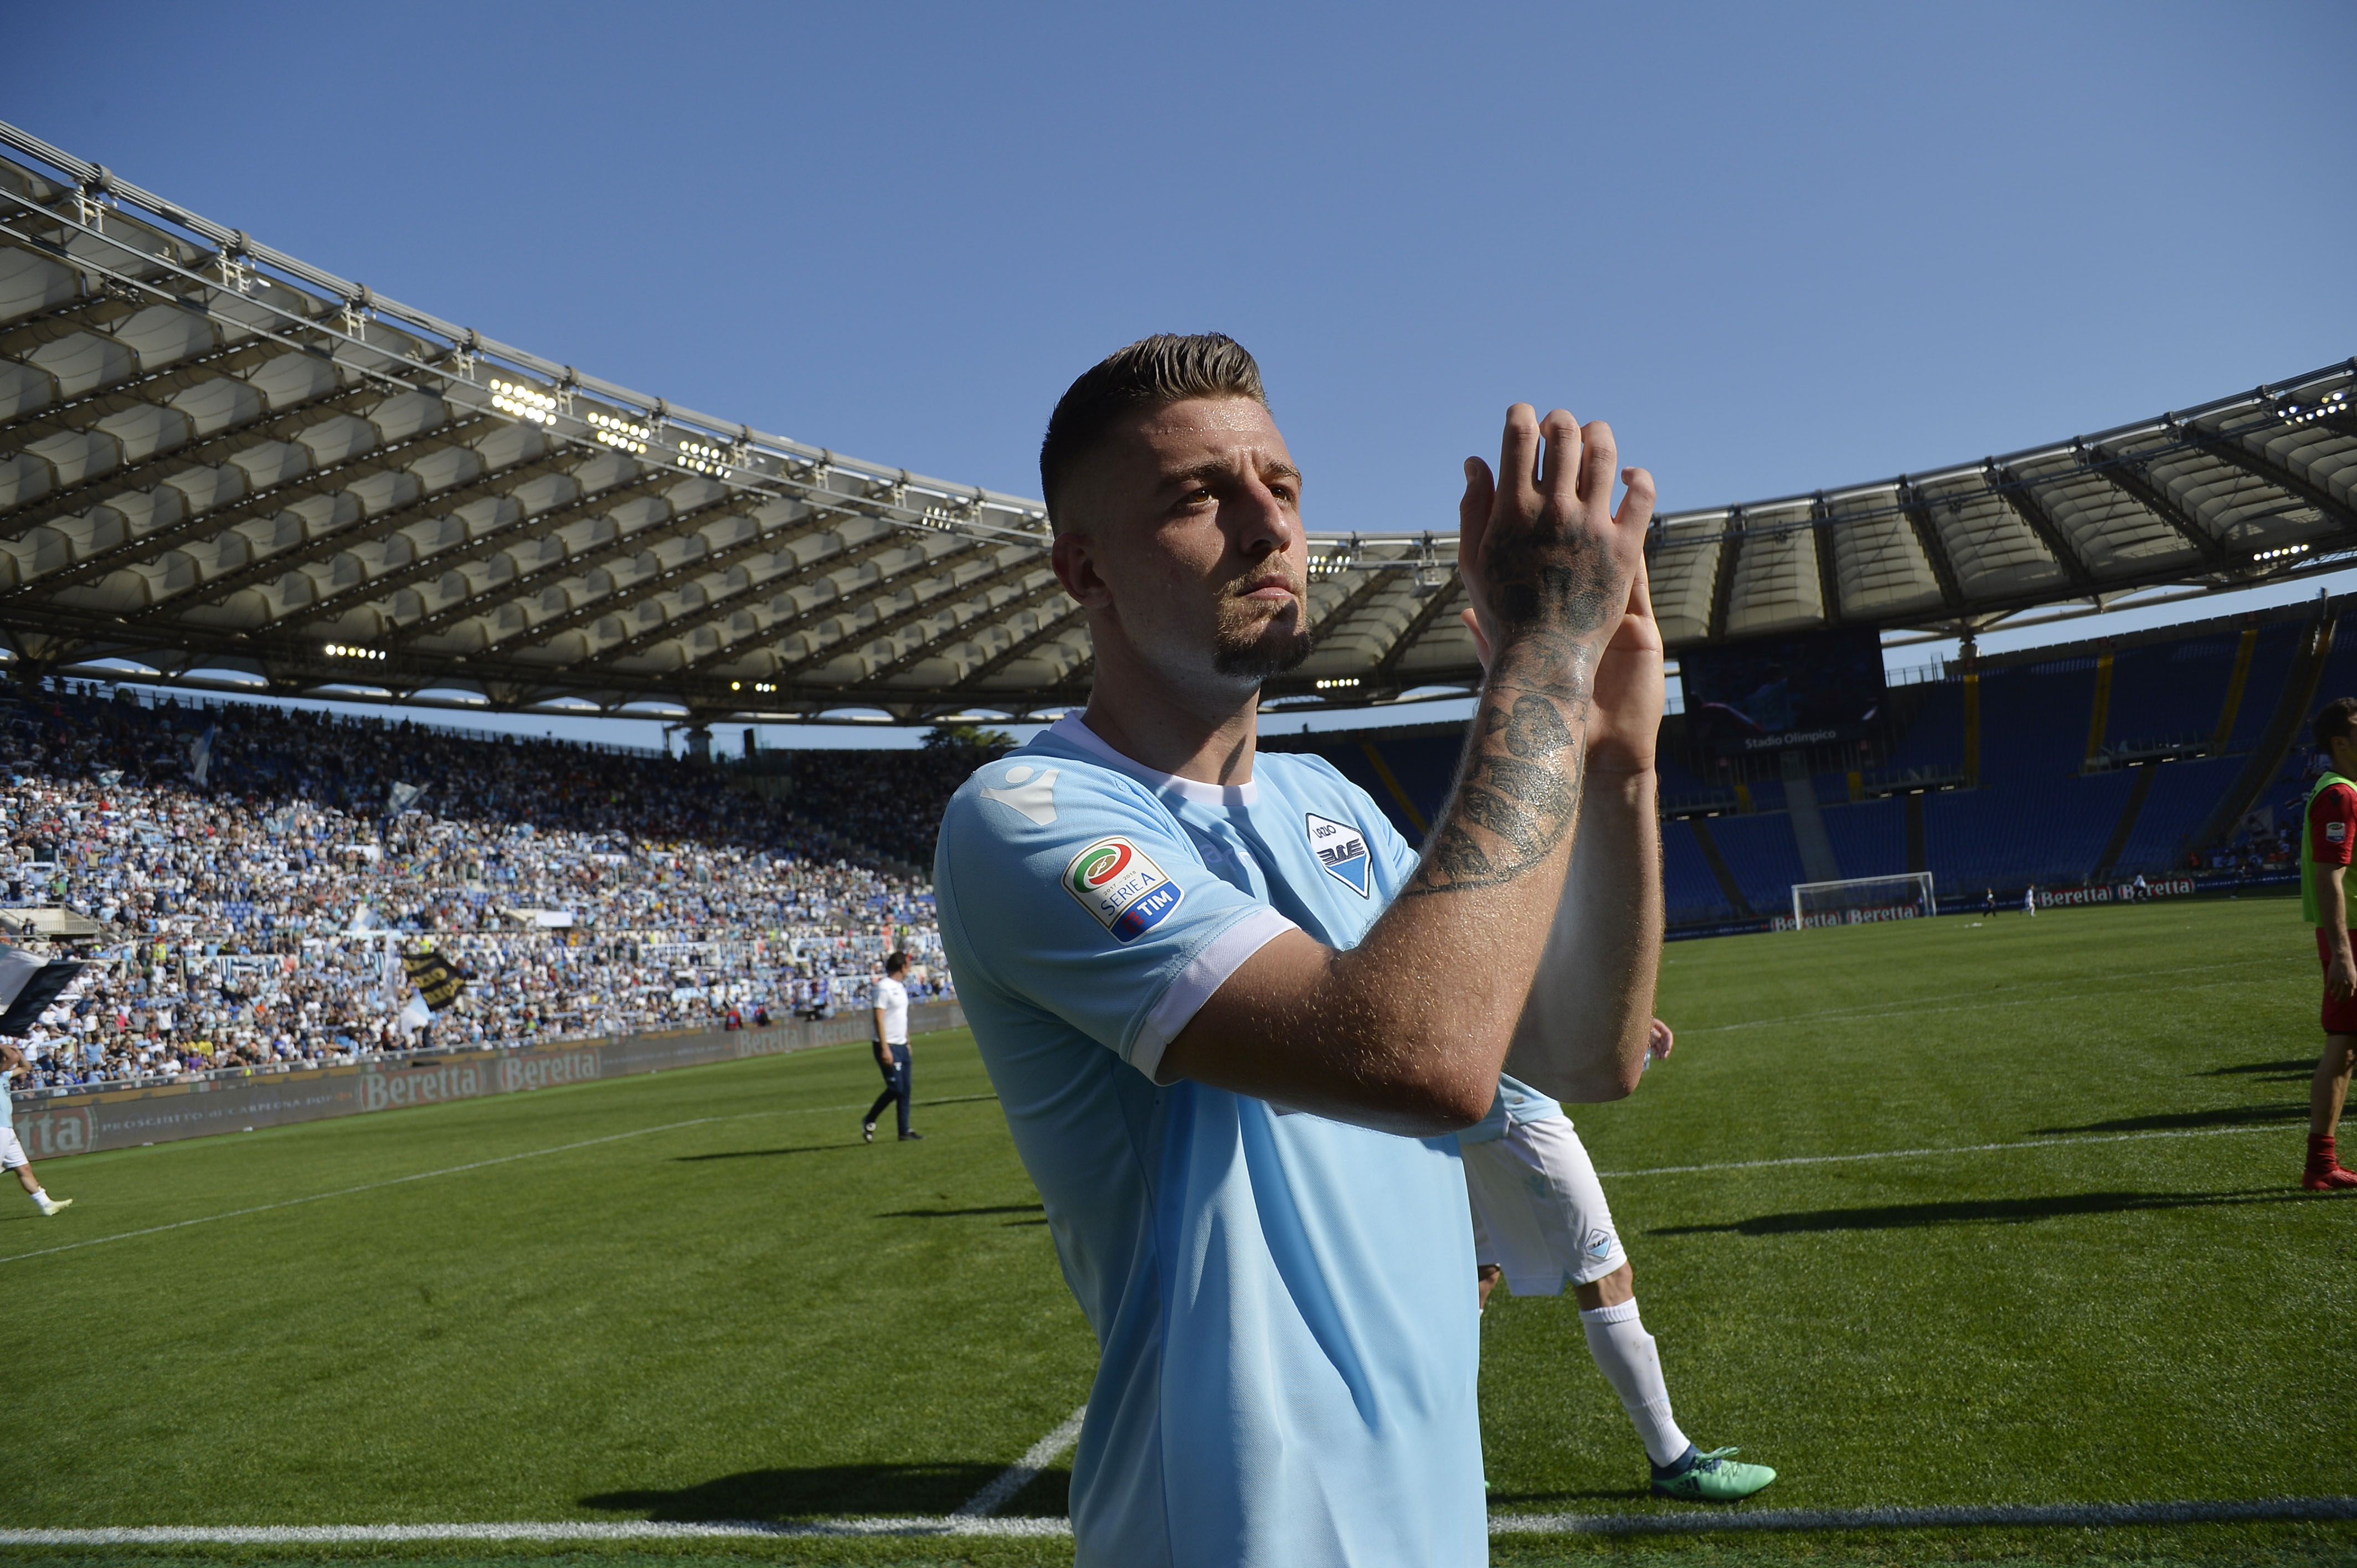 ROME, ROME - APRIL 22:  Sergej Milinkovic Savic of SS Lazio celebrates a winner game after the serie A match between SS Lazio and UC Sampdoria at Stadio Olimpico on April 22, 2018 in Rome, Italy.  (Photo by Marco Rosi/Getty Images)